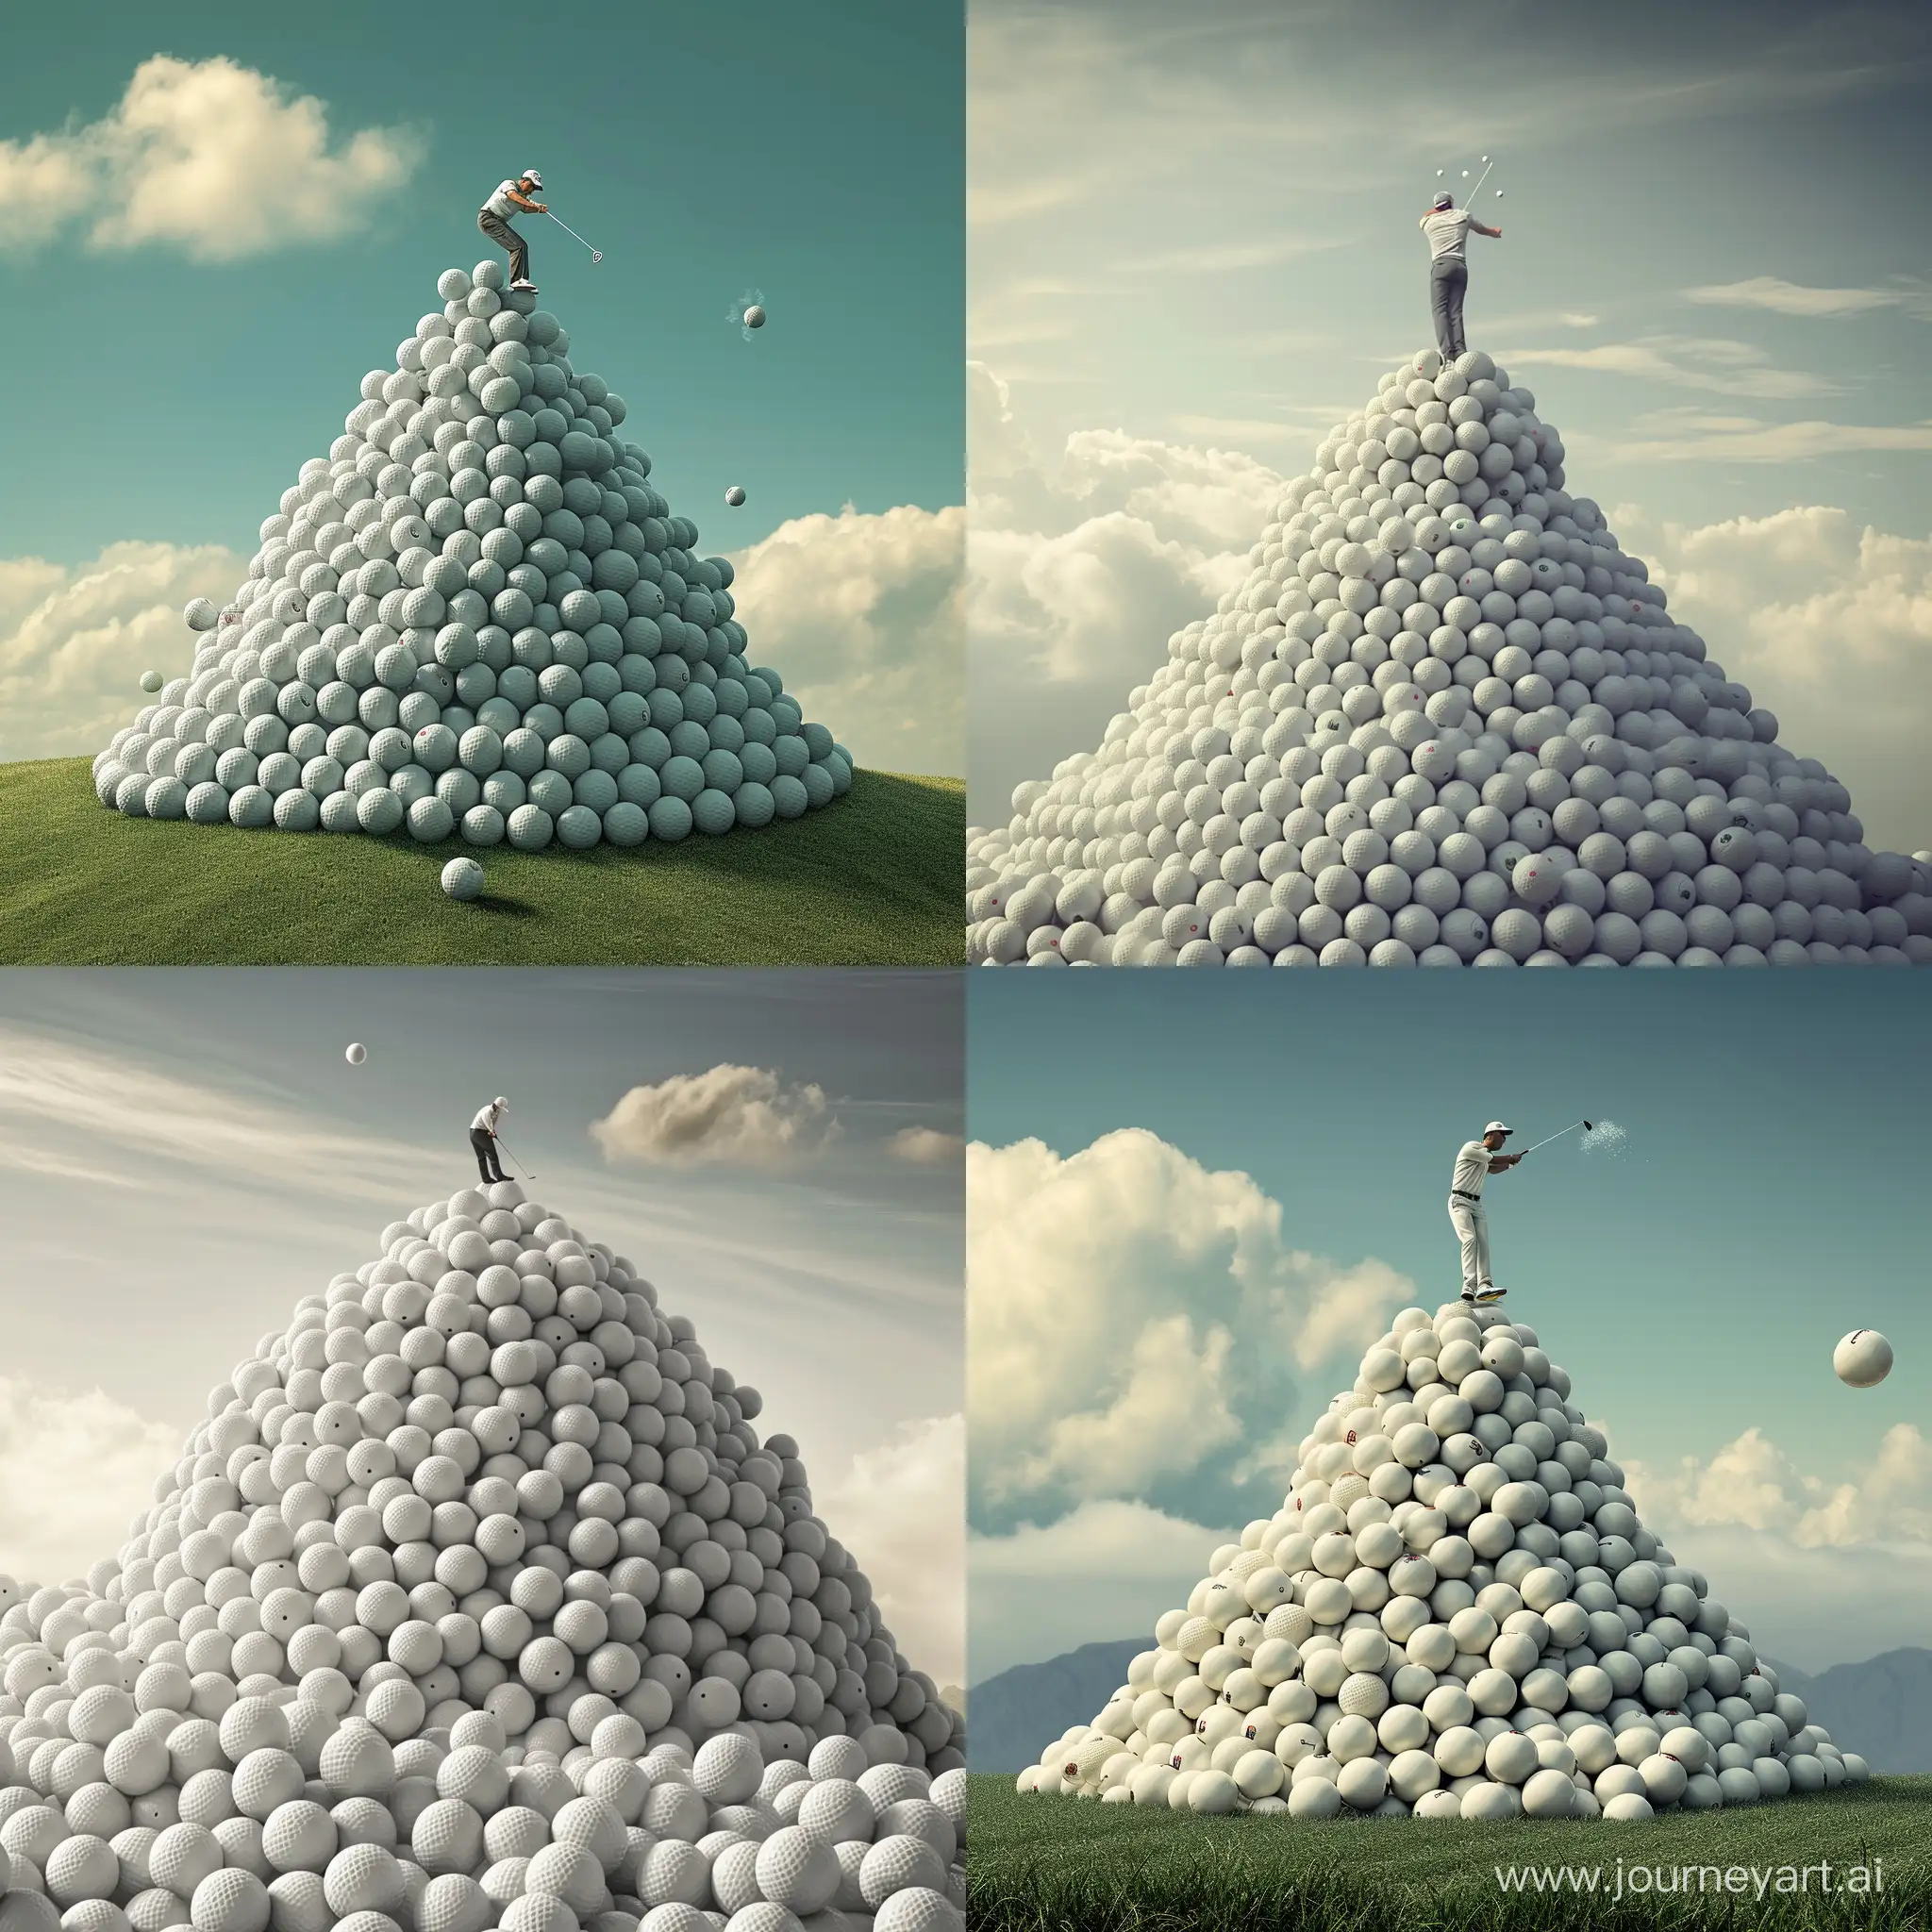 Lots of golf balls heaped like a mountain, with a person on top sending one flying to a distant hole